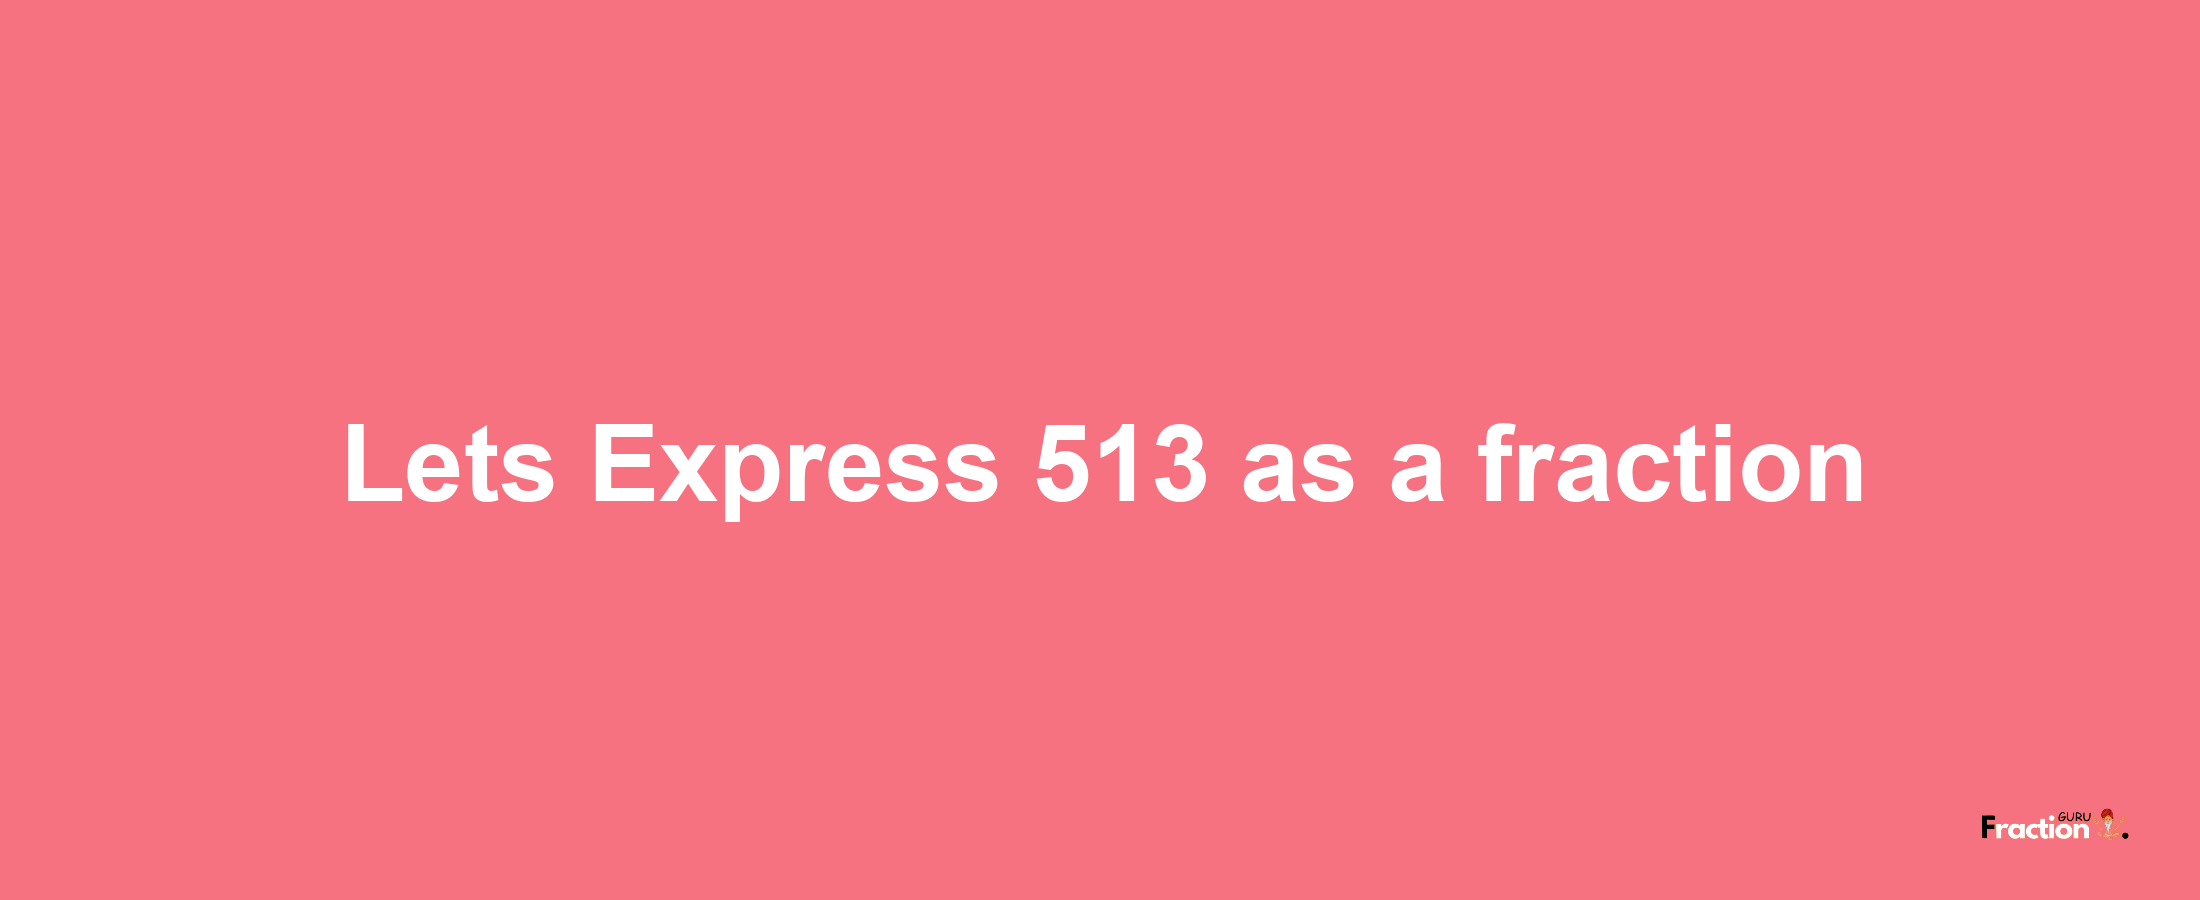 Lets Express 513 as afraction